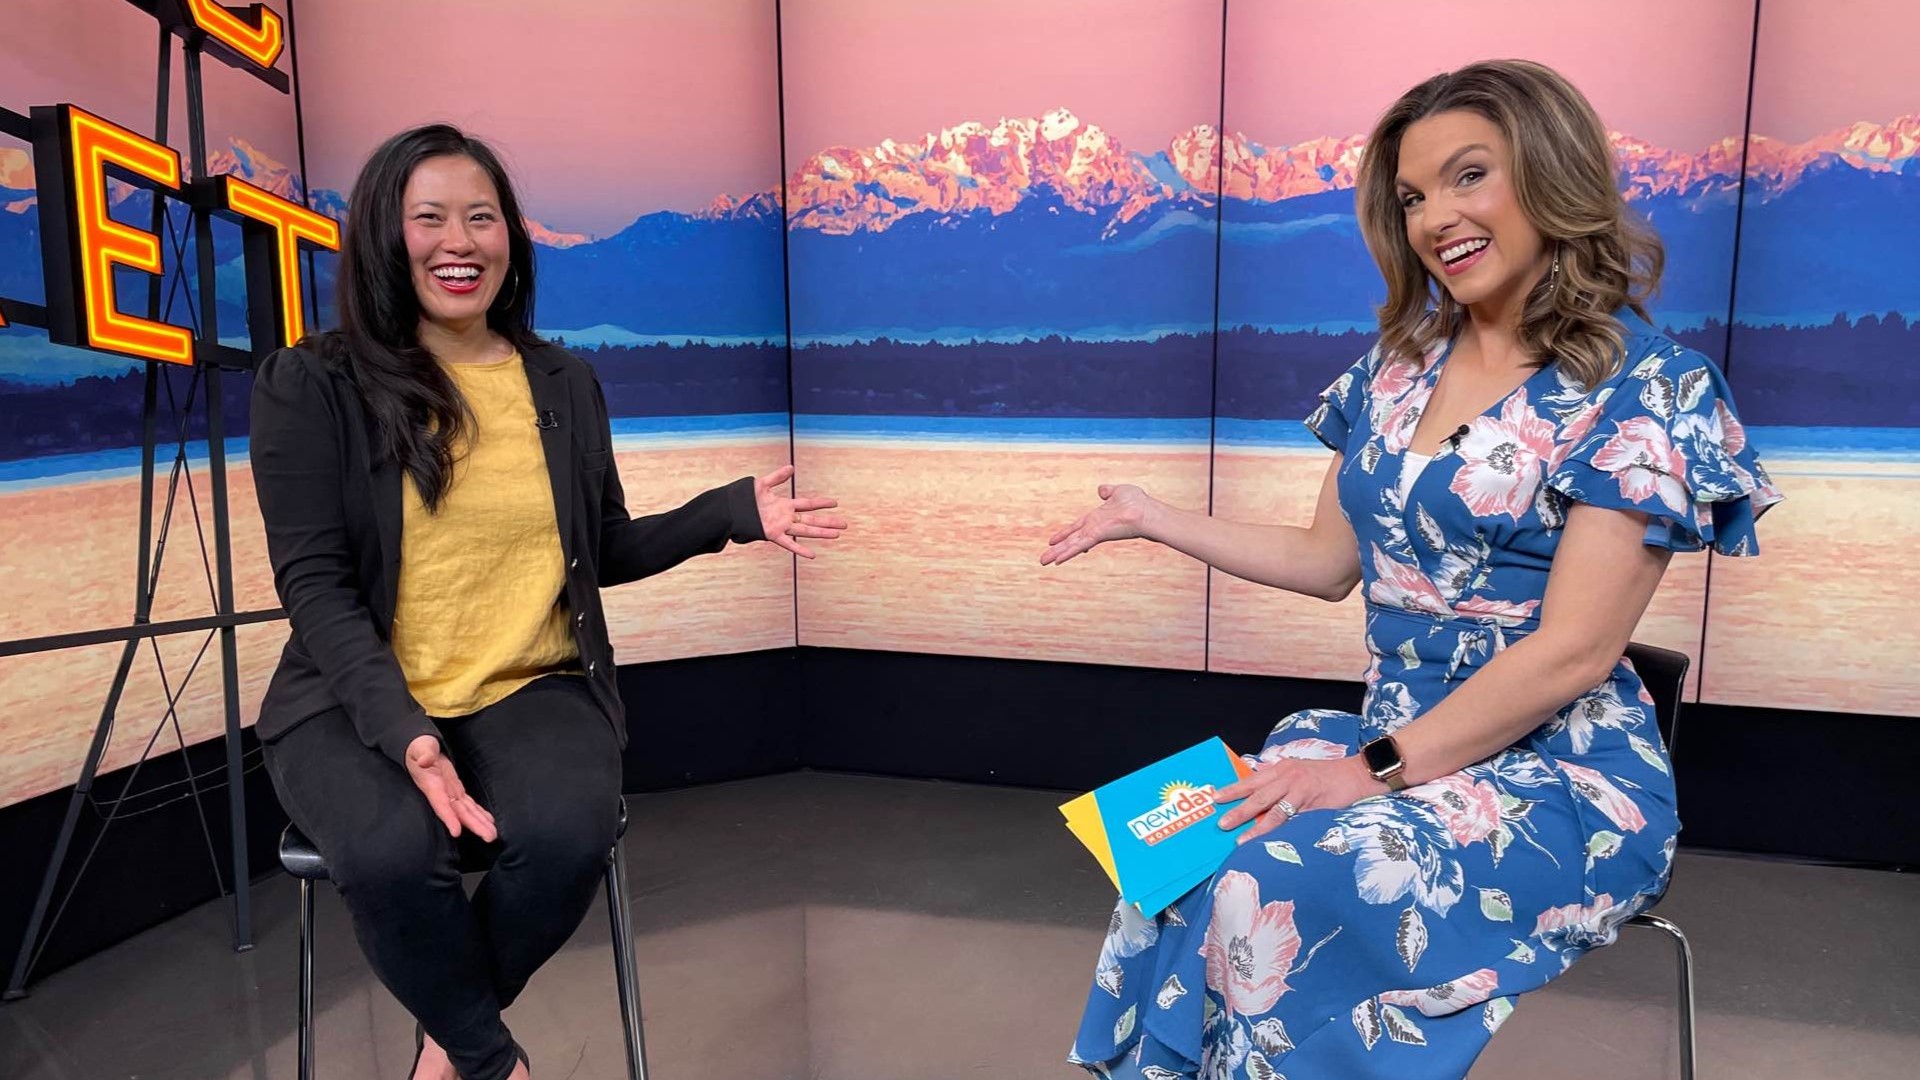 Speaker and author of "24 Ways to Move More," Nicole Tsong, joined New Day to discuss why setting boundaries is so vital for relationships. #newdaynw